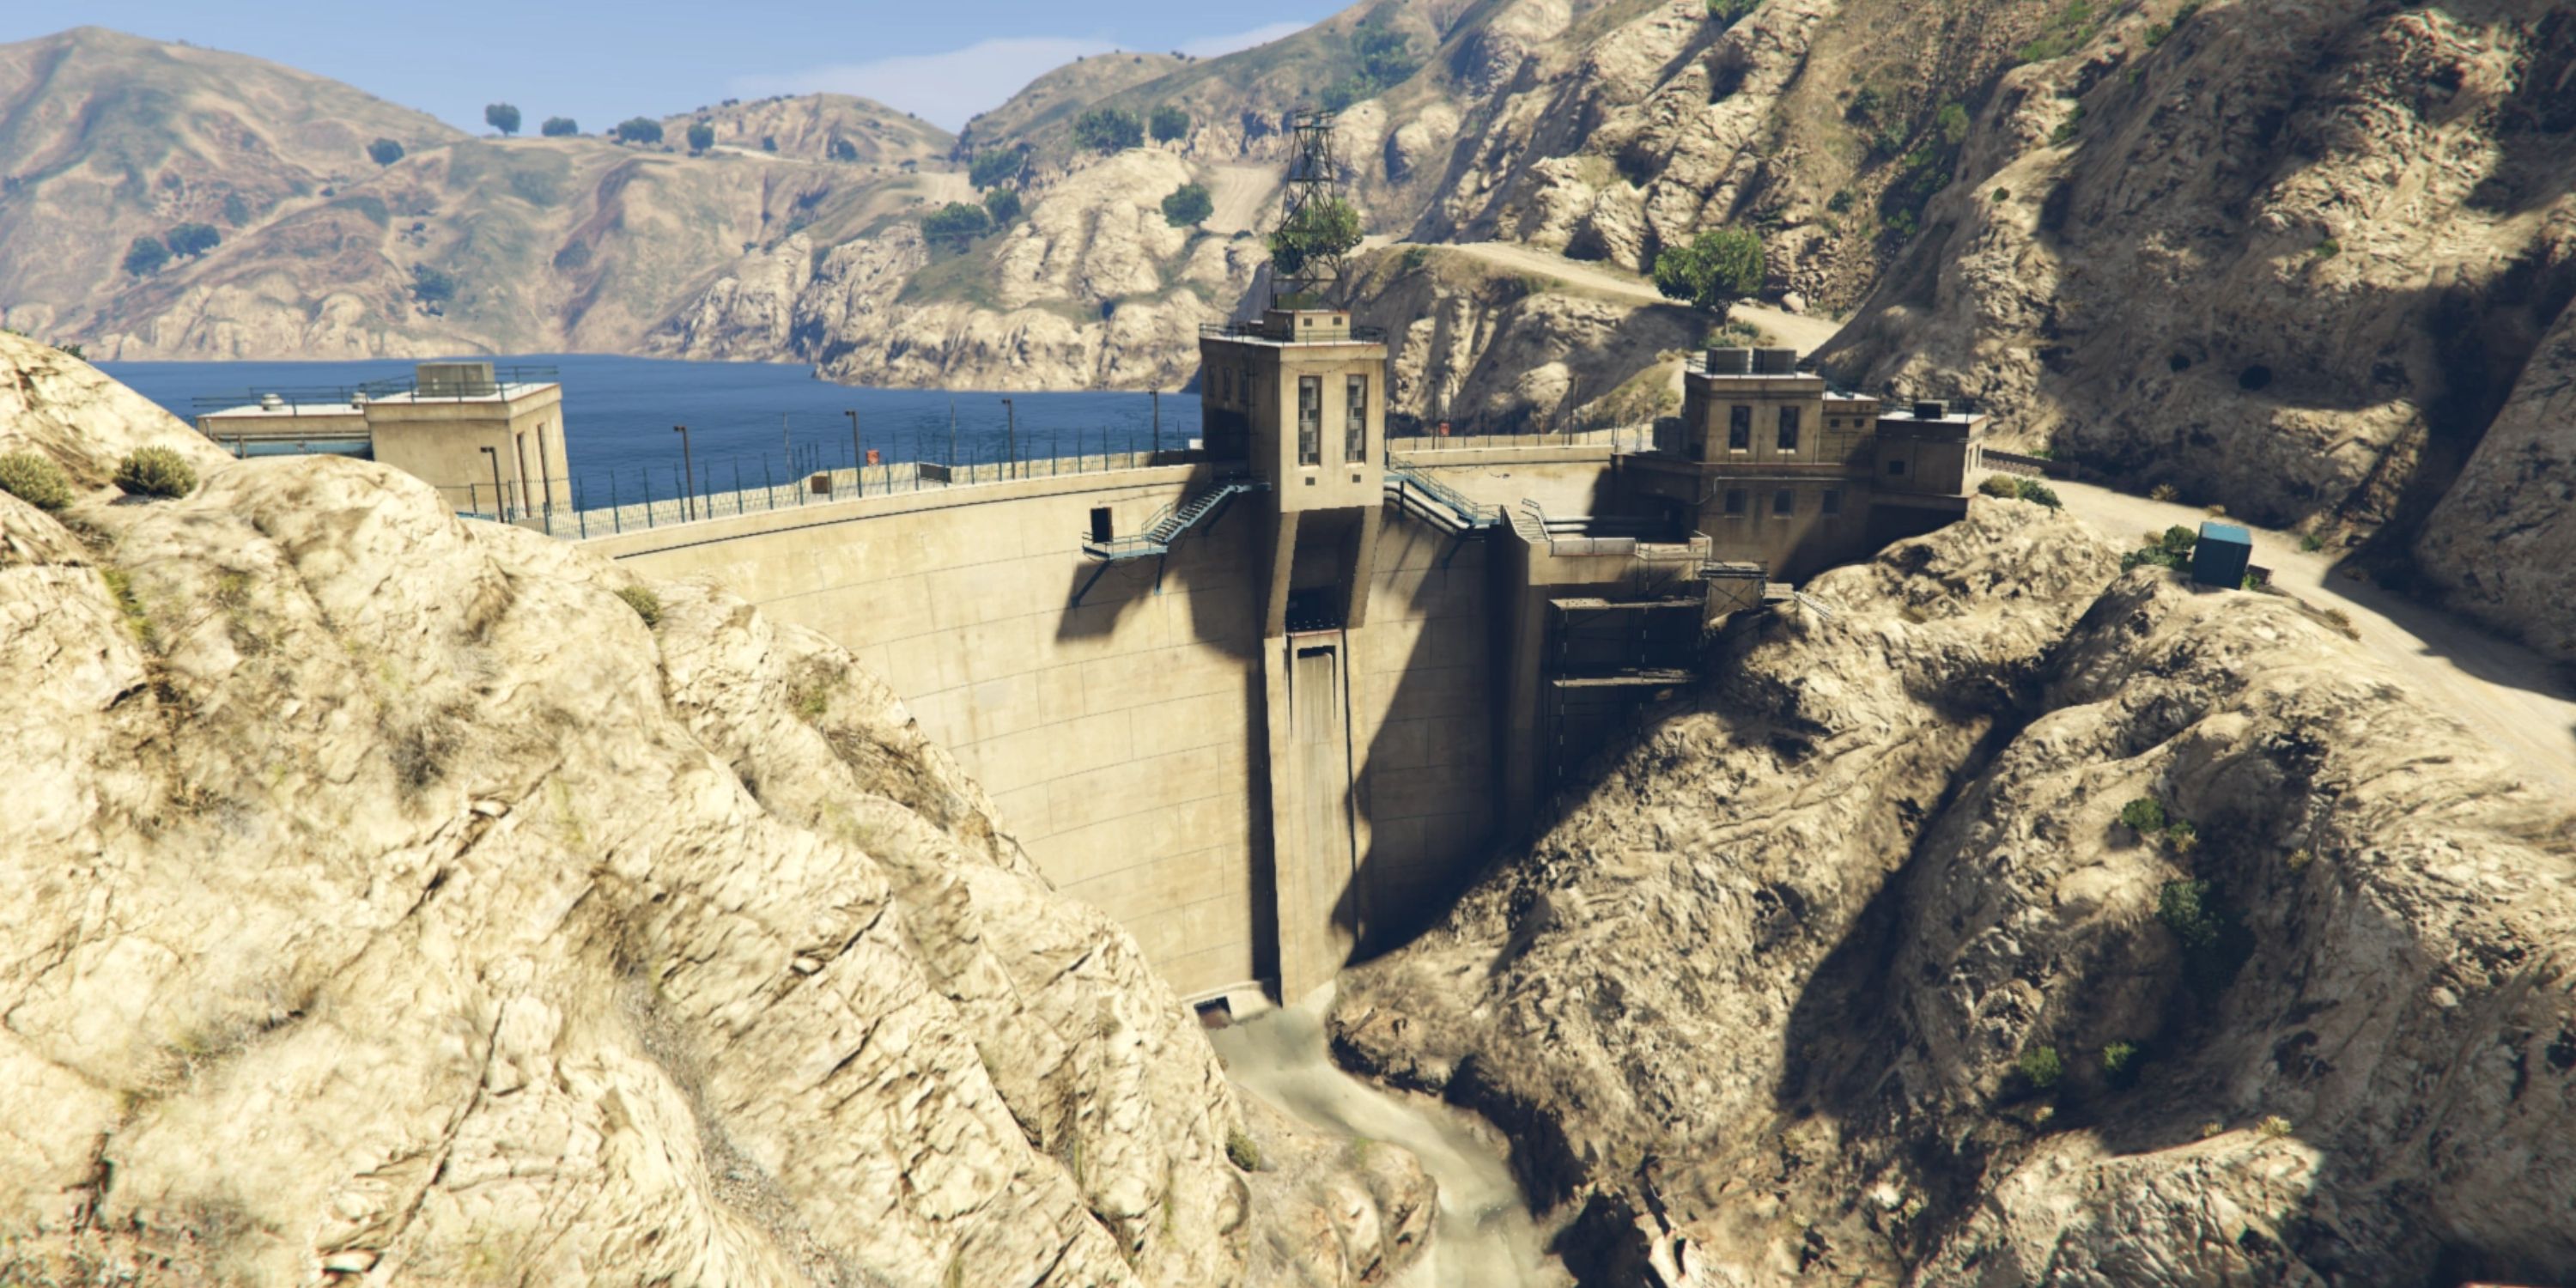 land act dam location in gta online